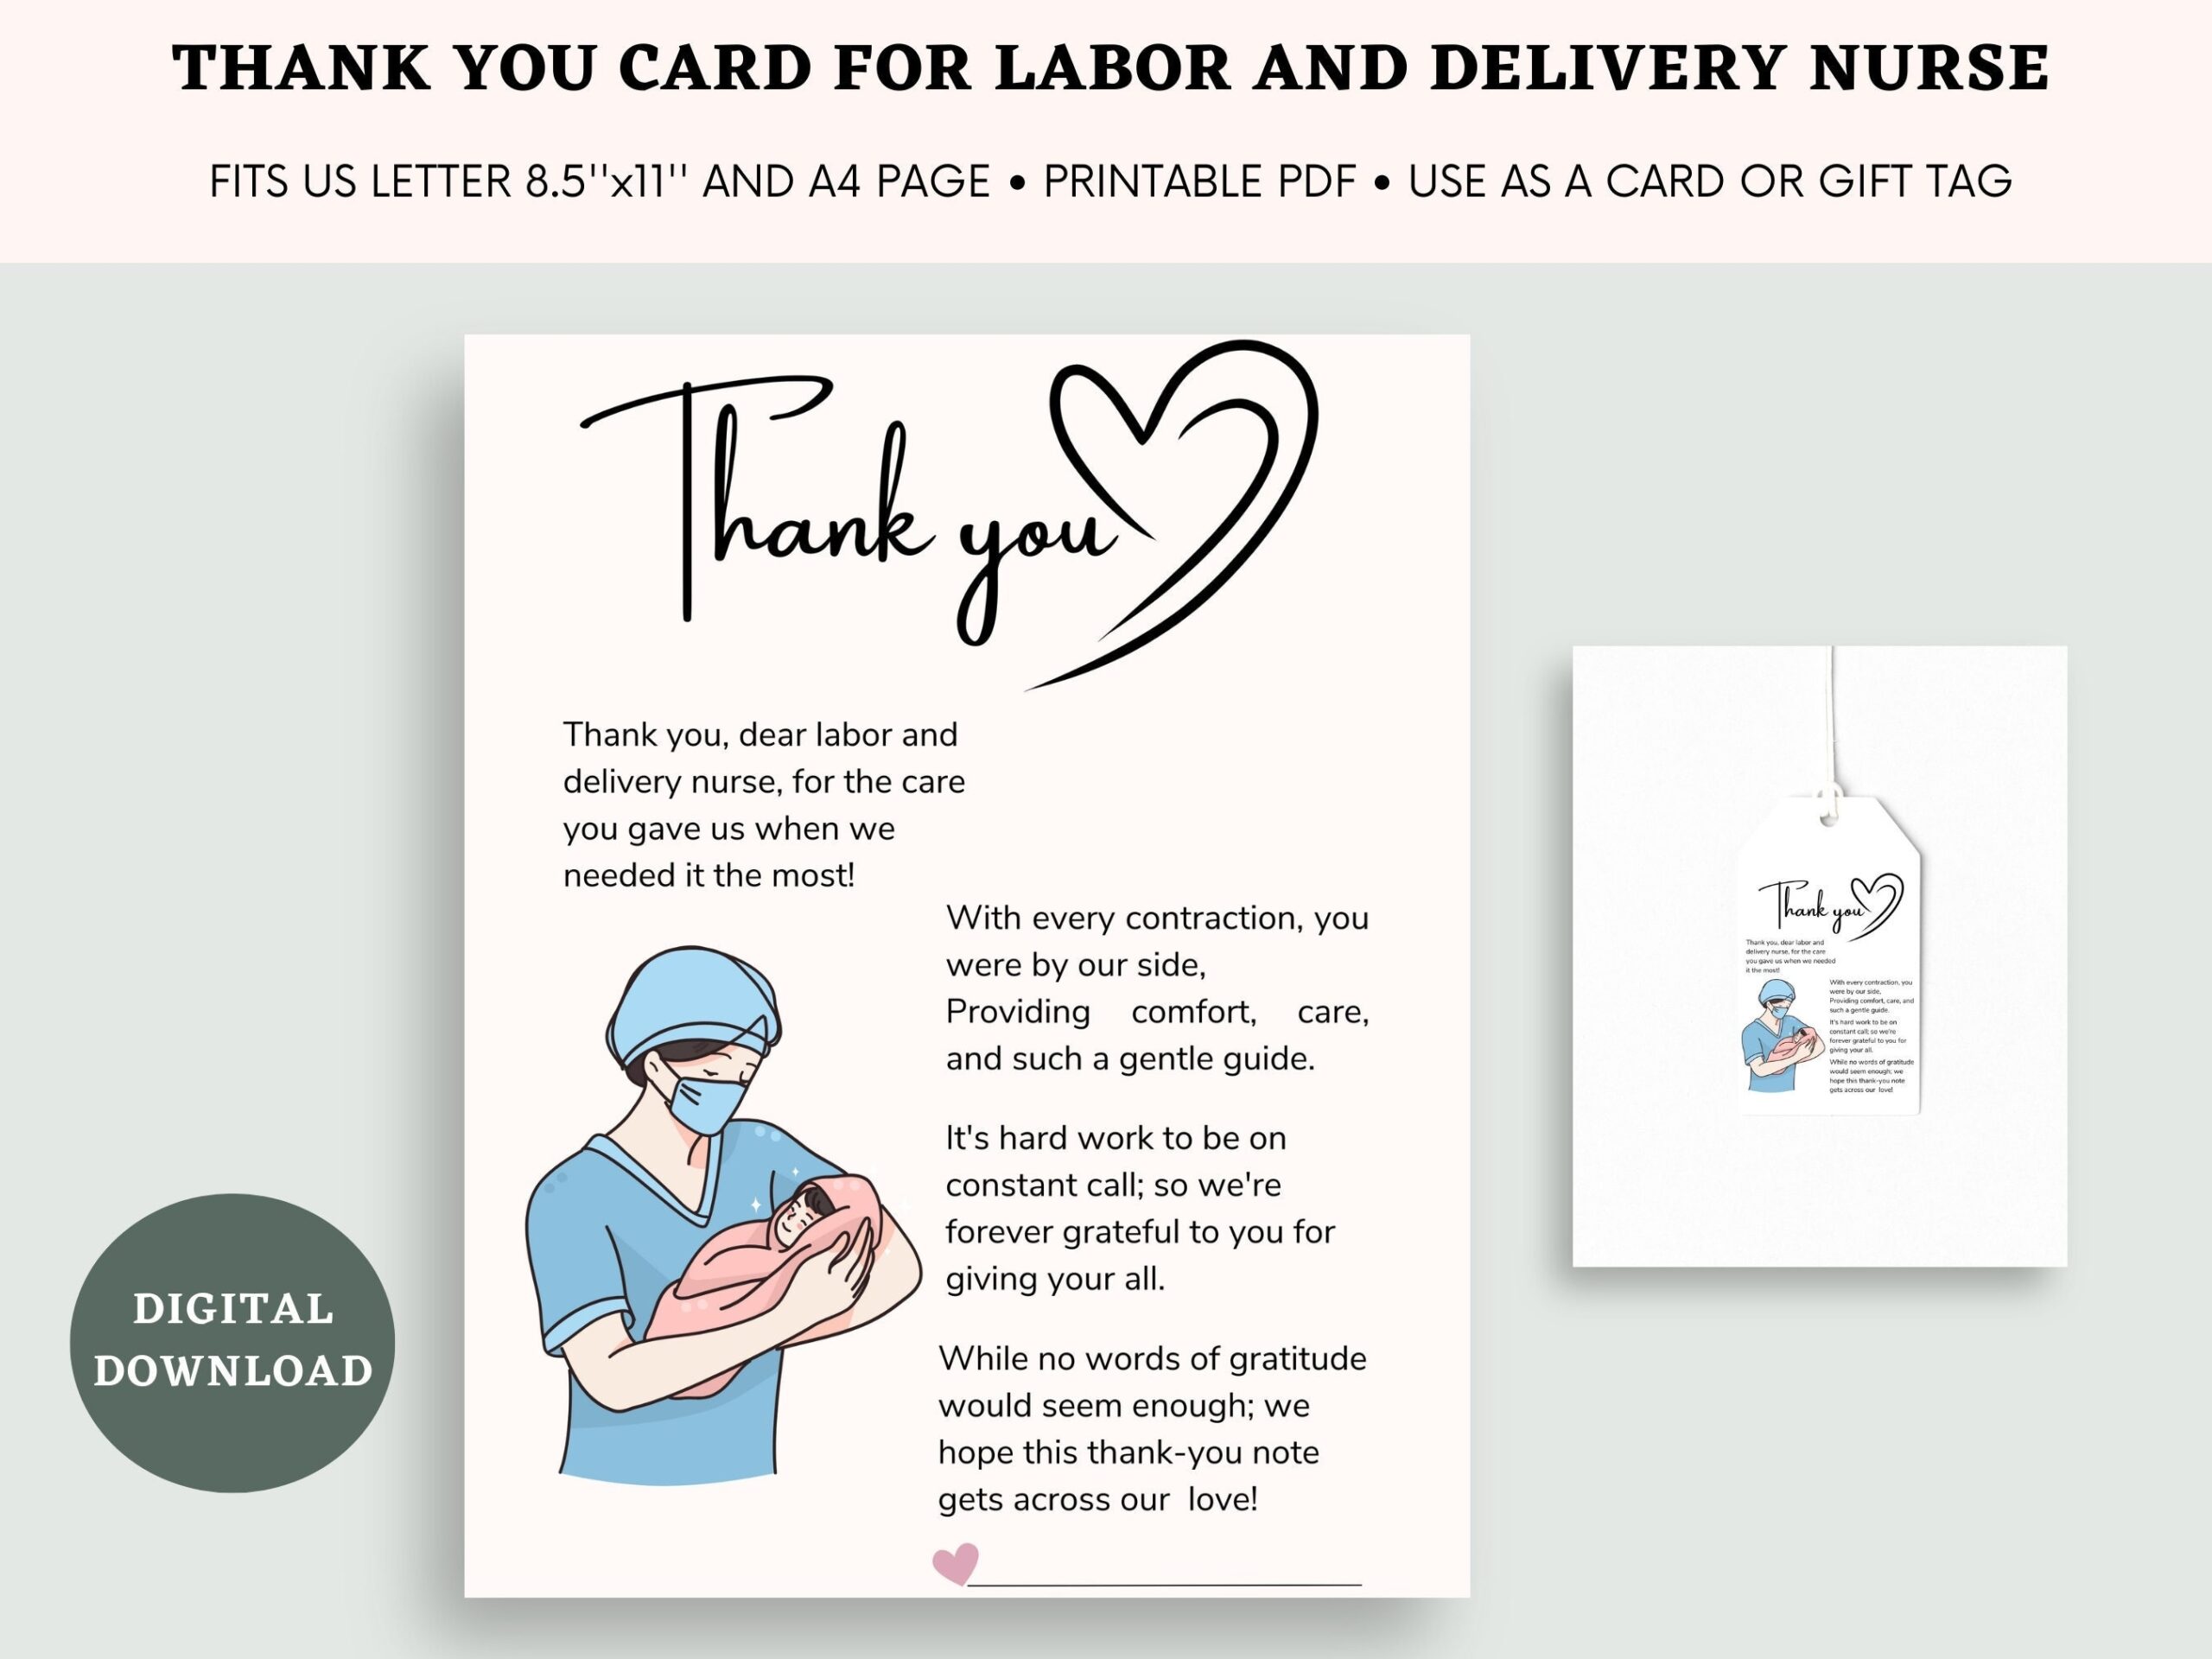 Printable Thank You Note For Labor And Delivery Nurse Printable Thank You Gift Tag For Labor And Delivery Nurse L D Nurse Thank You Card Etsy